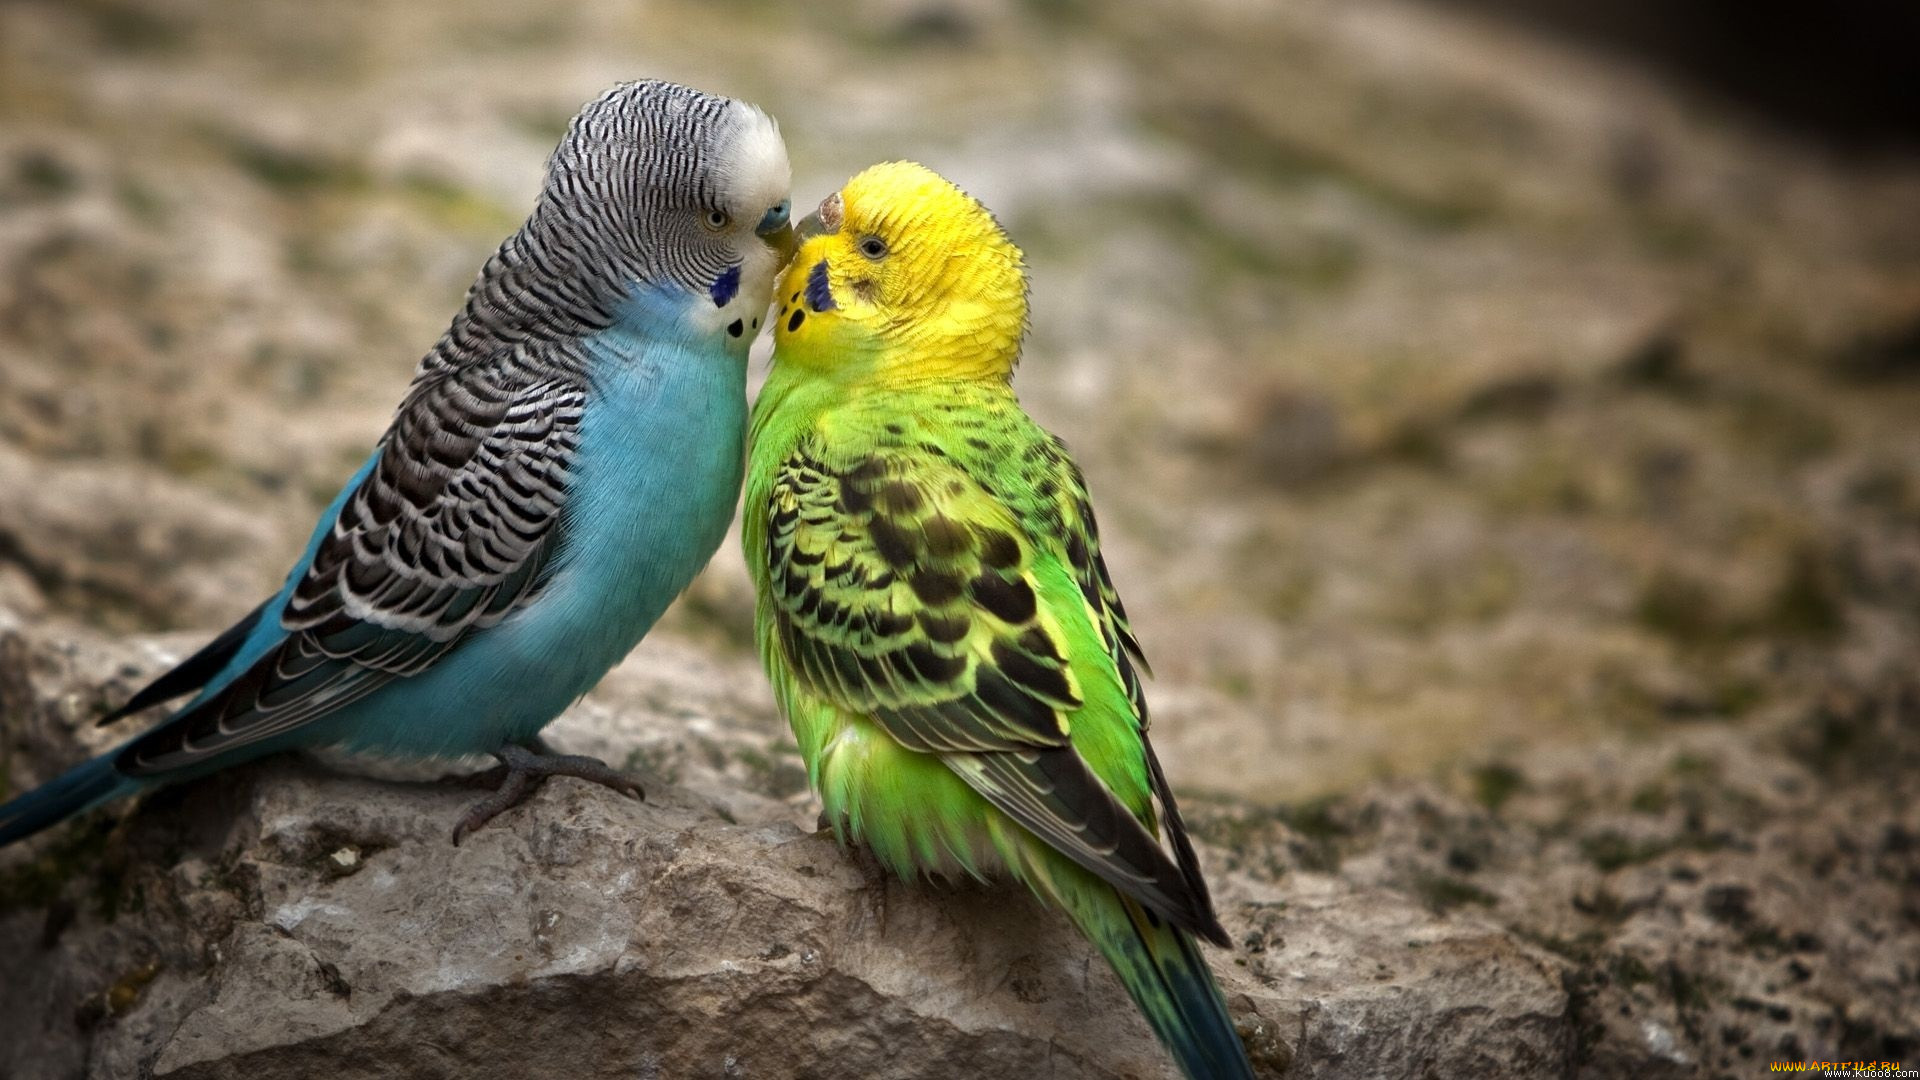 Two wavy parrots kissing